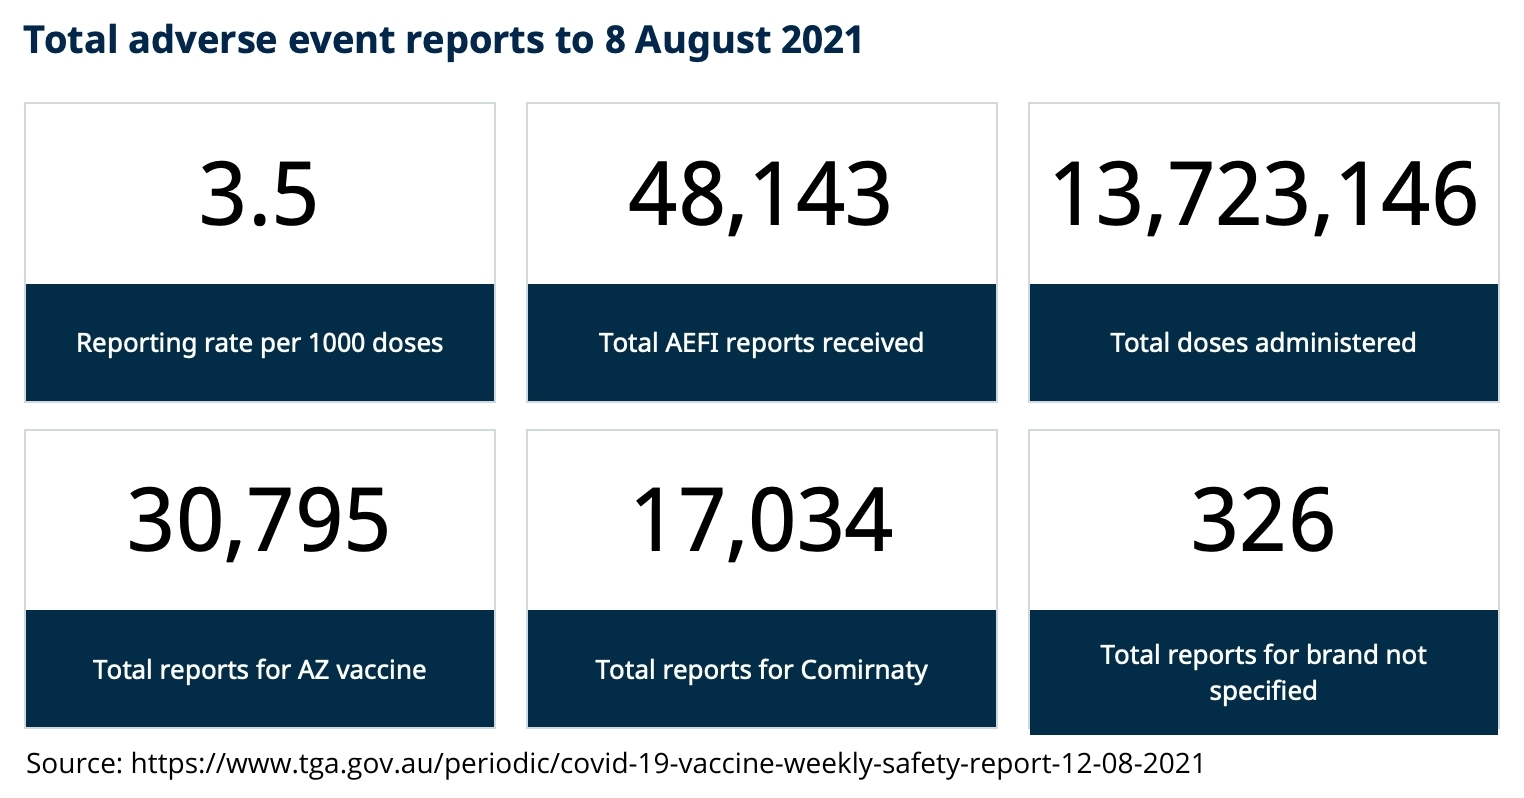 https://www.tga.gov.au/periodic/covid-19-vaccine-weekly-safety-report-12-08-2021